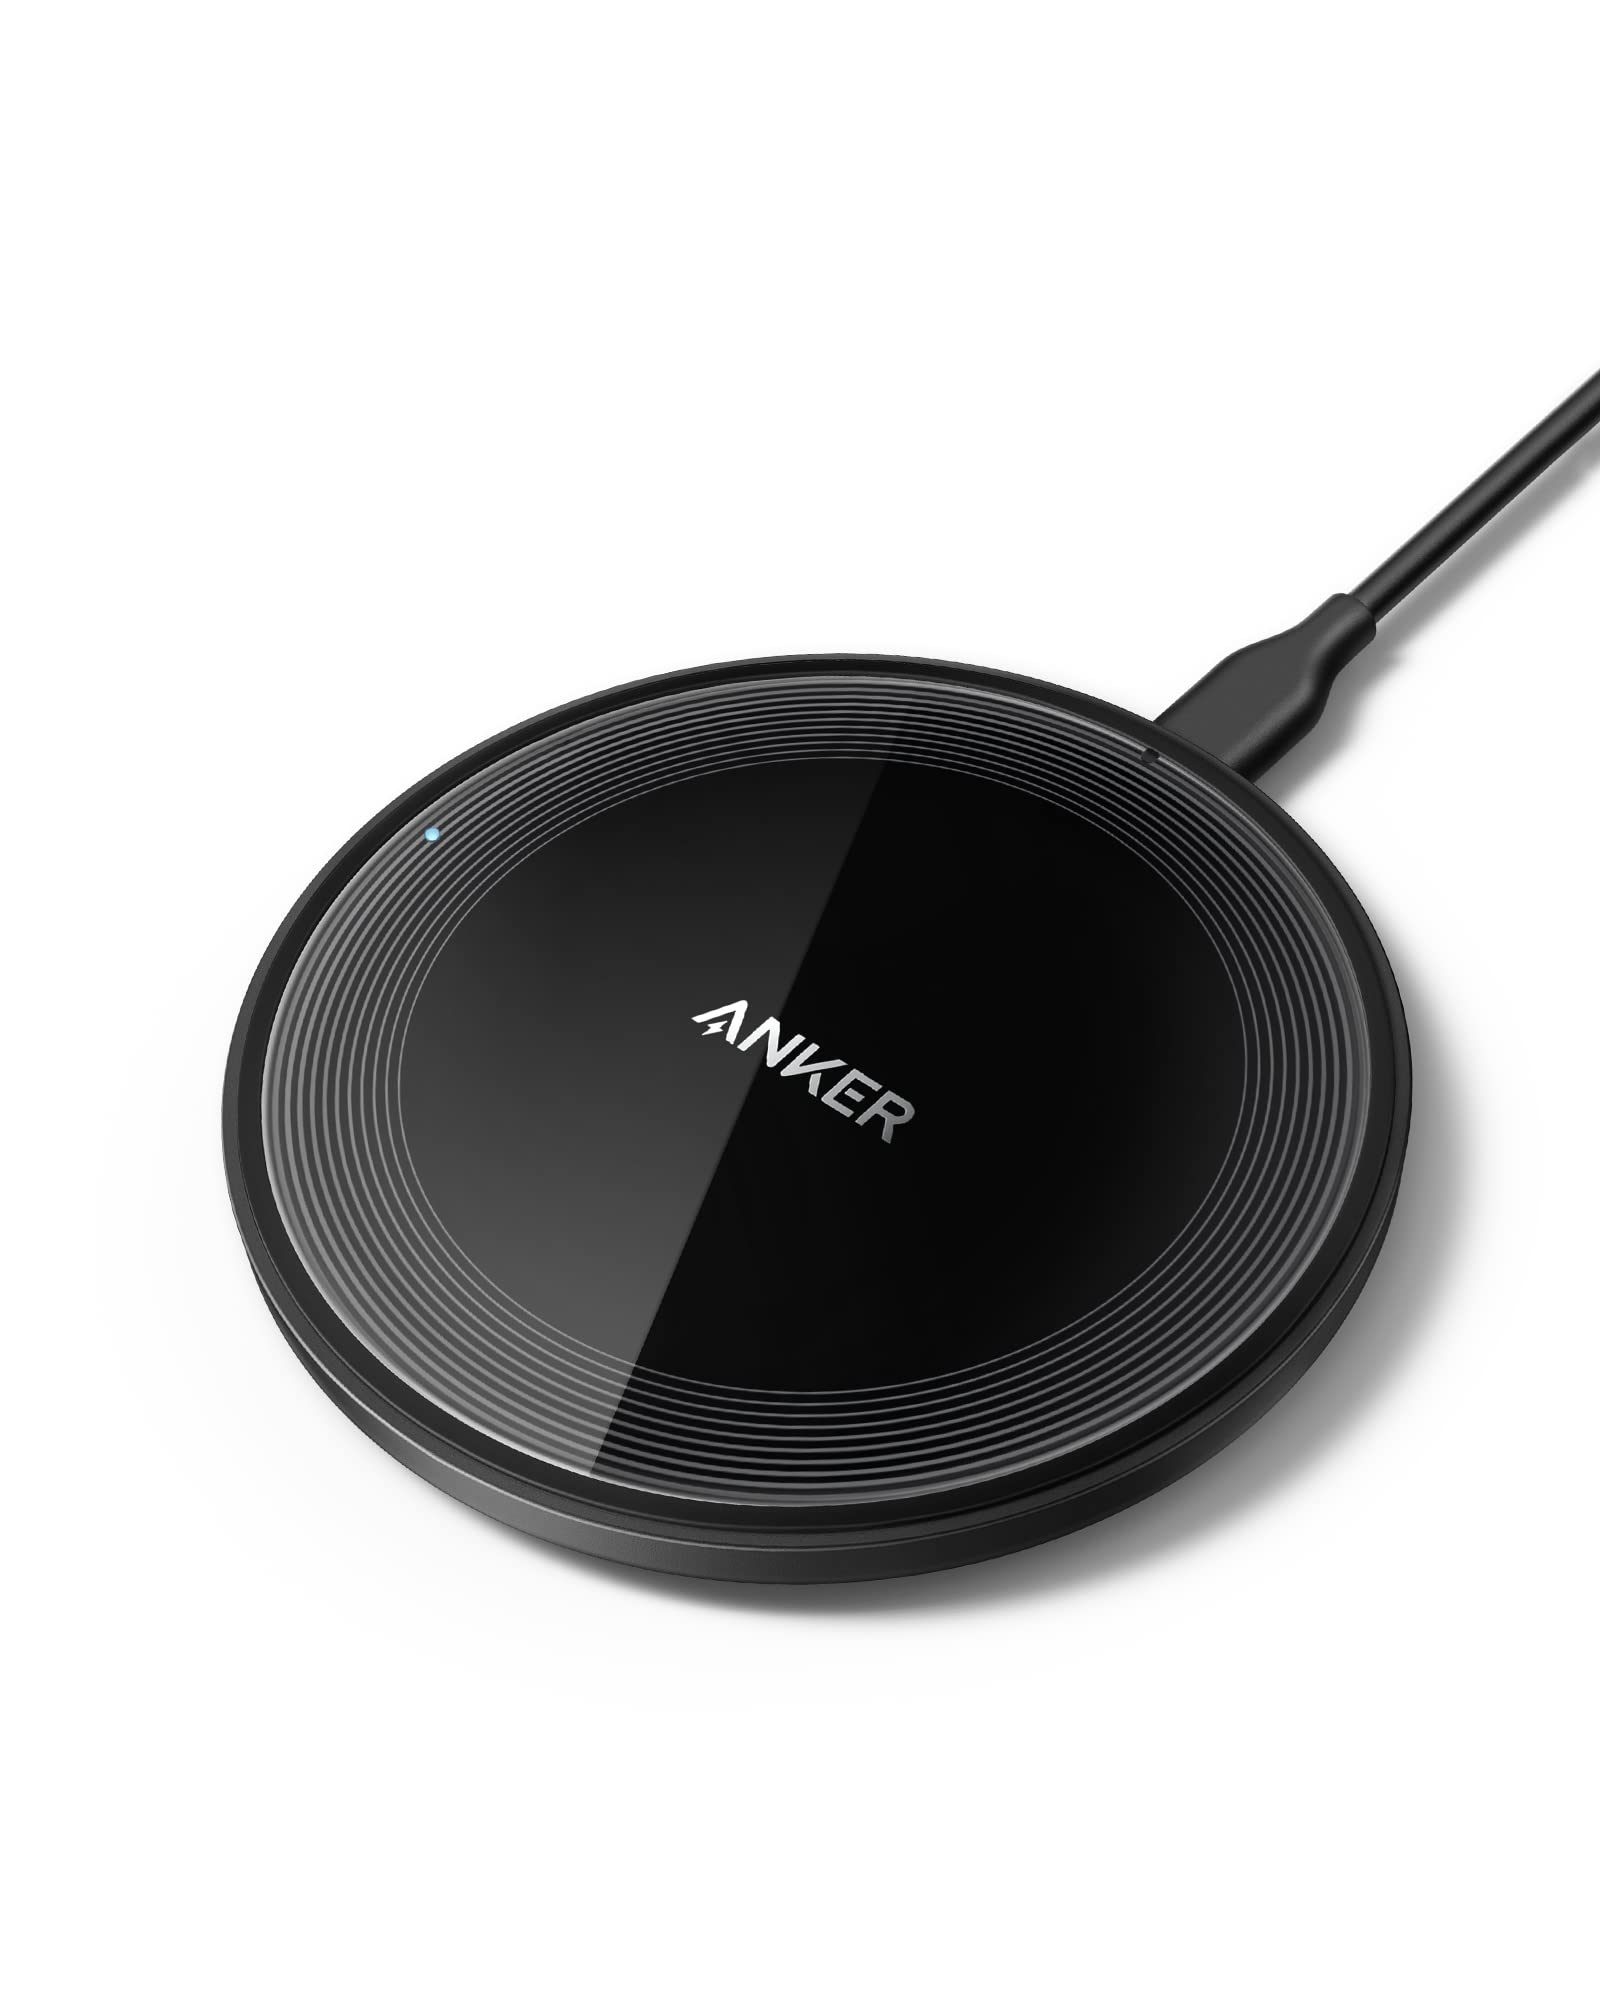 Anker 315 Wireless Charger (Pad), 10W Max Fast Charging, Compatible with iPhone, Samsung, AirPods, Samsung Buds, and More (Wall Charger Not Included) - $10.99